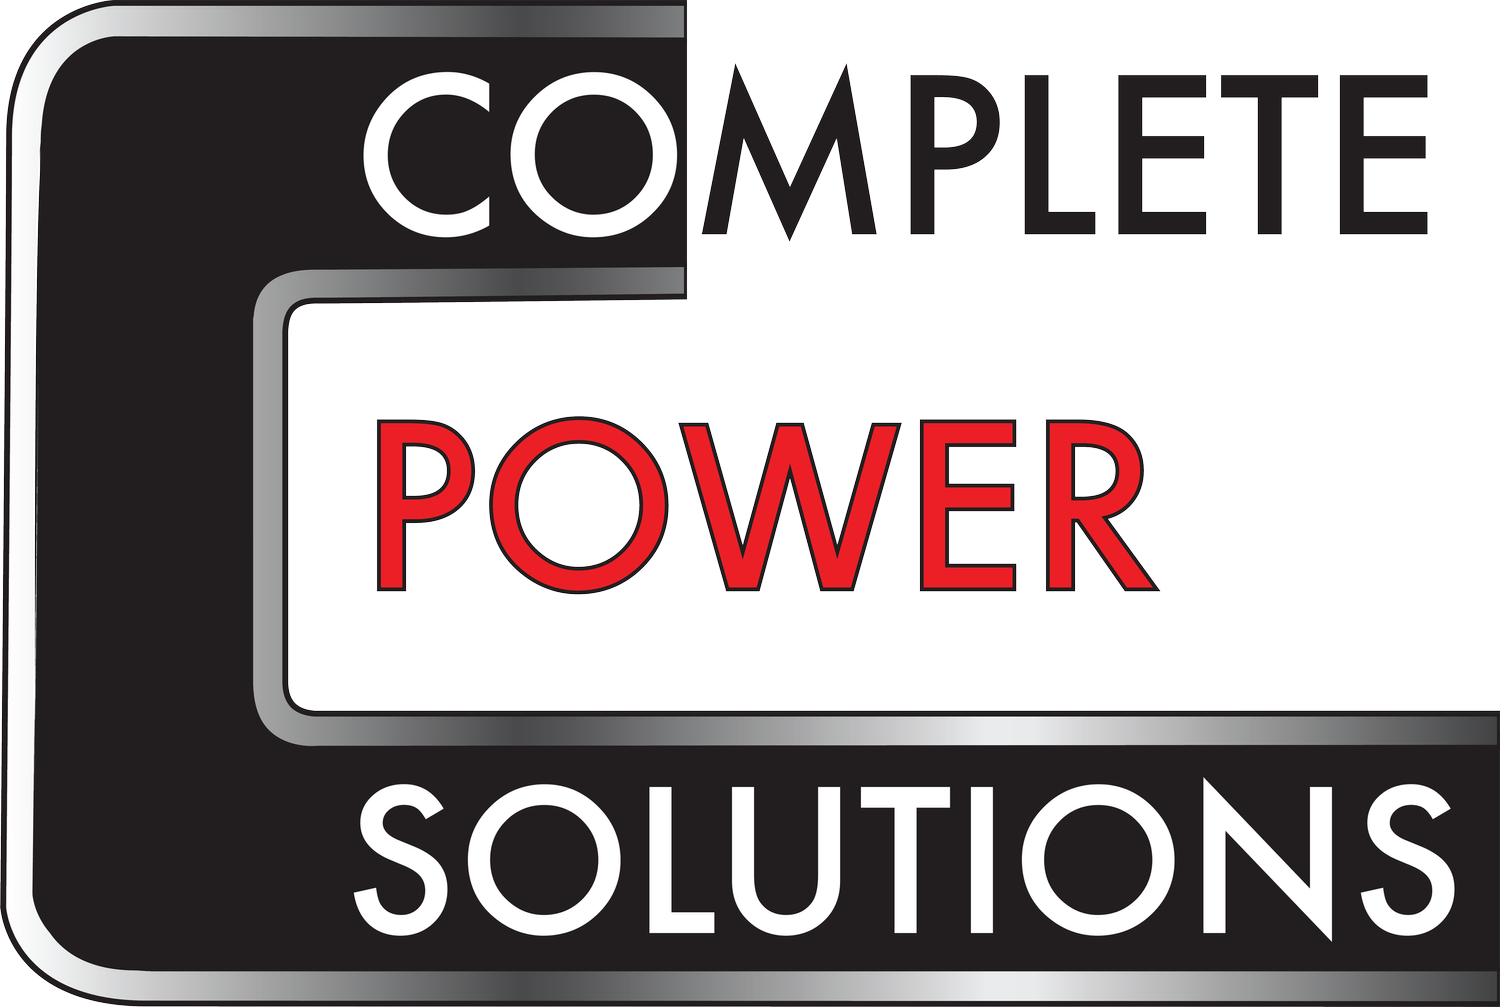 Complete Power Solutions